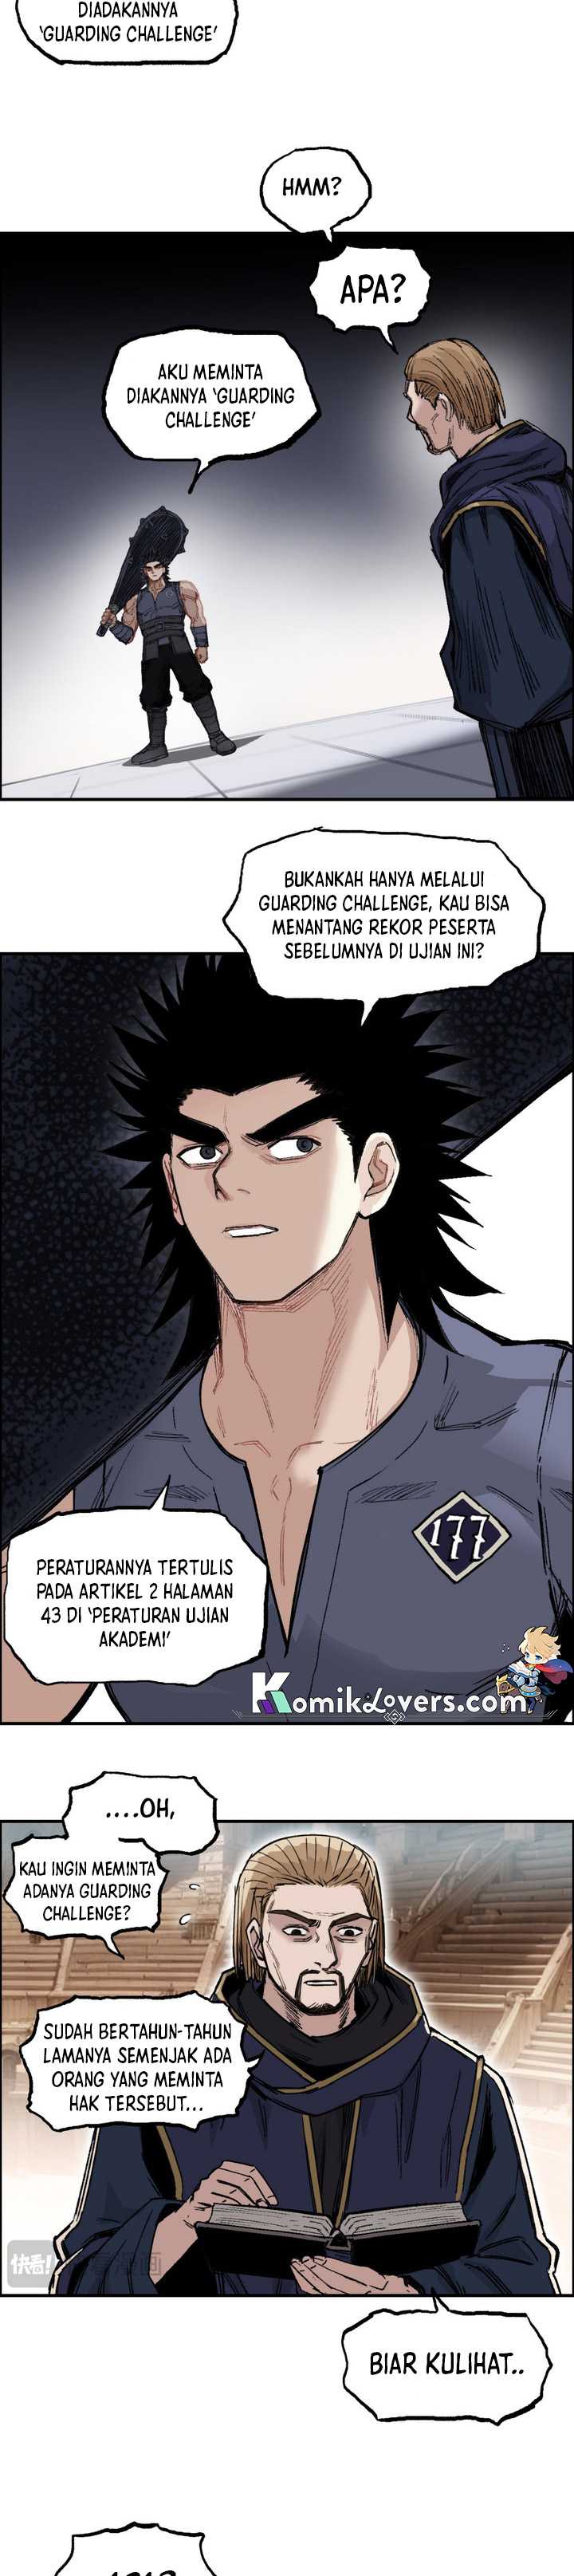 Muscle Mage Chapter 06